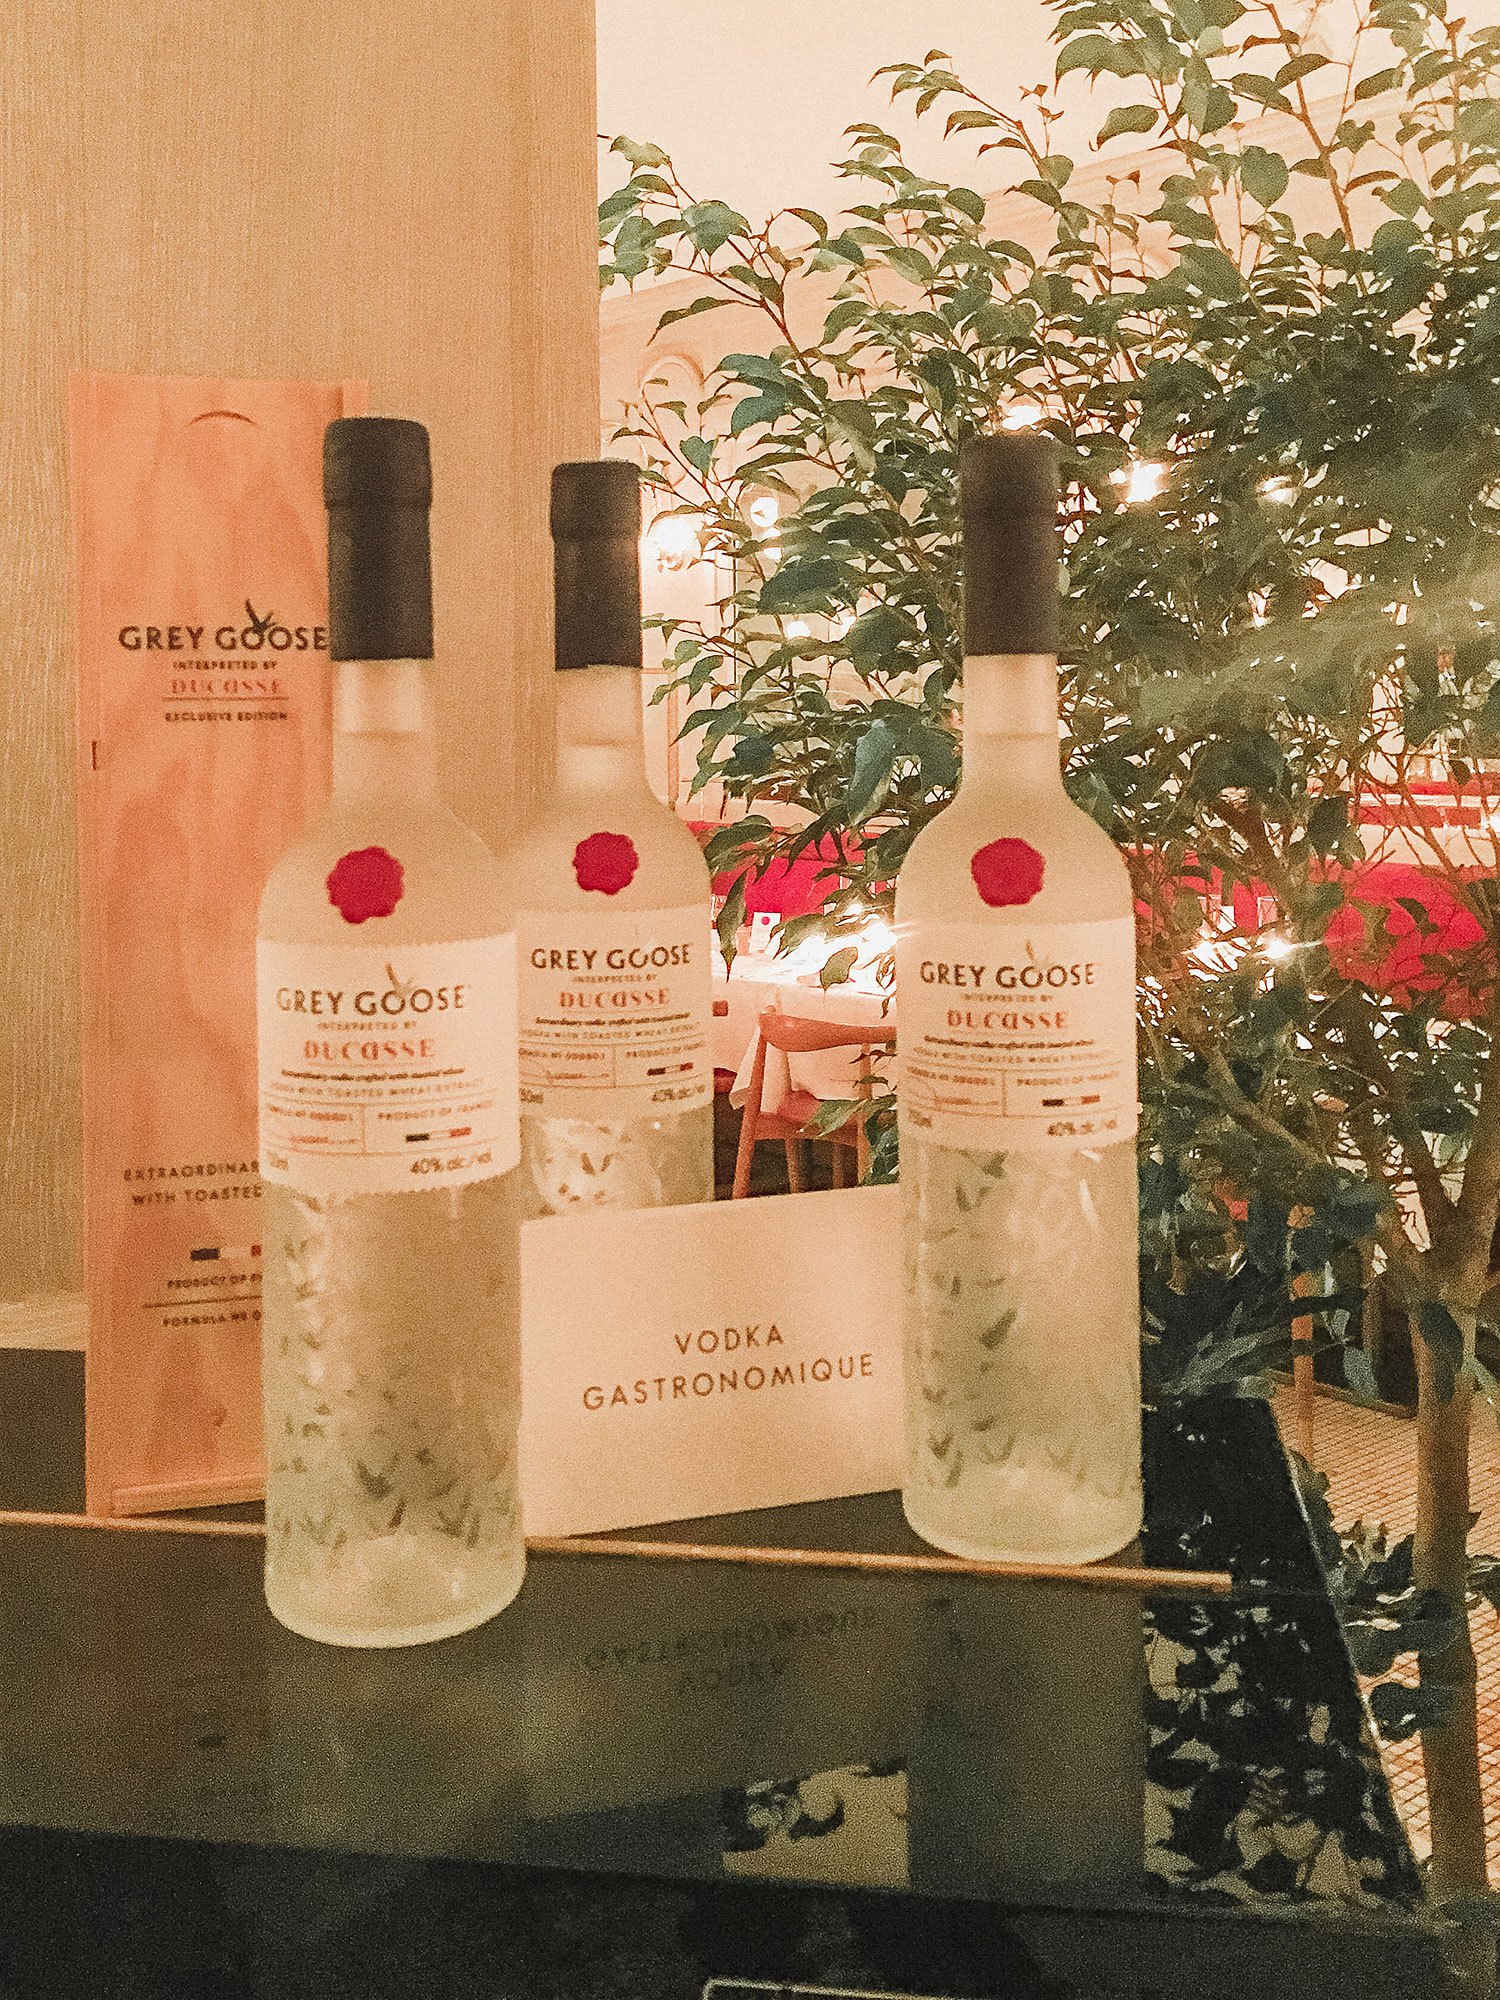 Benoit NYC Grey Goose Vodka Gastronomique with 3 michelin-starred Chef Alain Ducasse